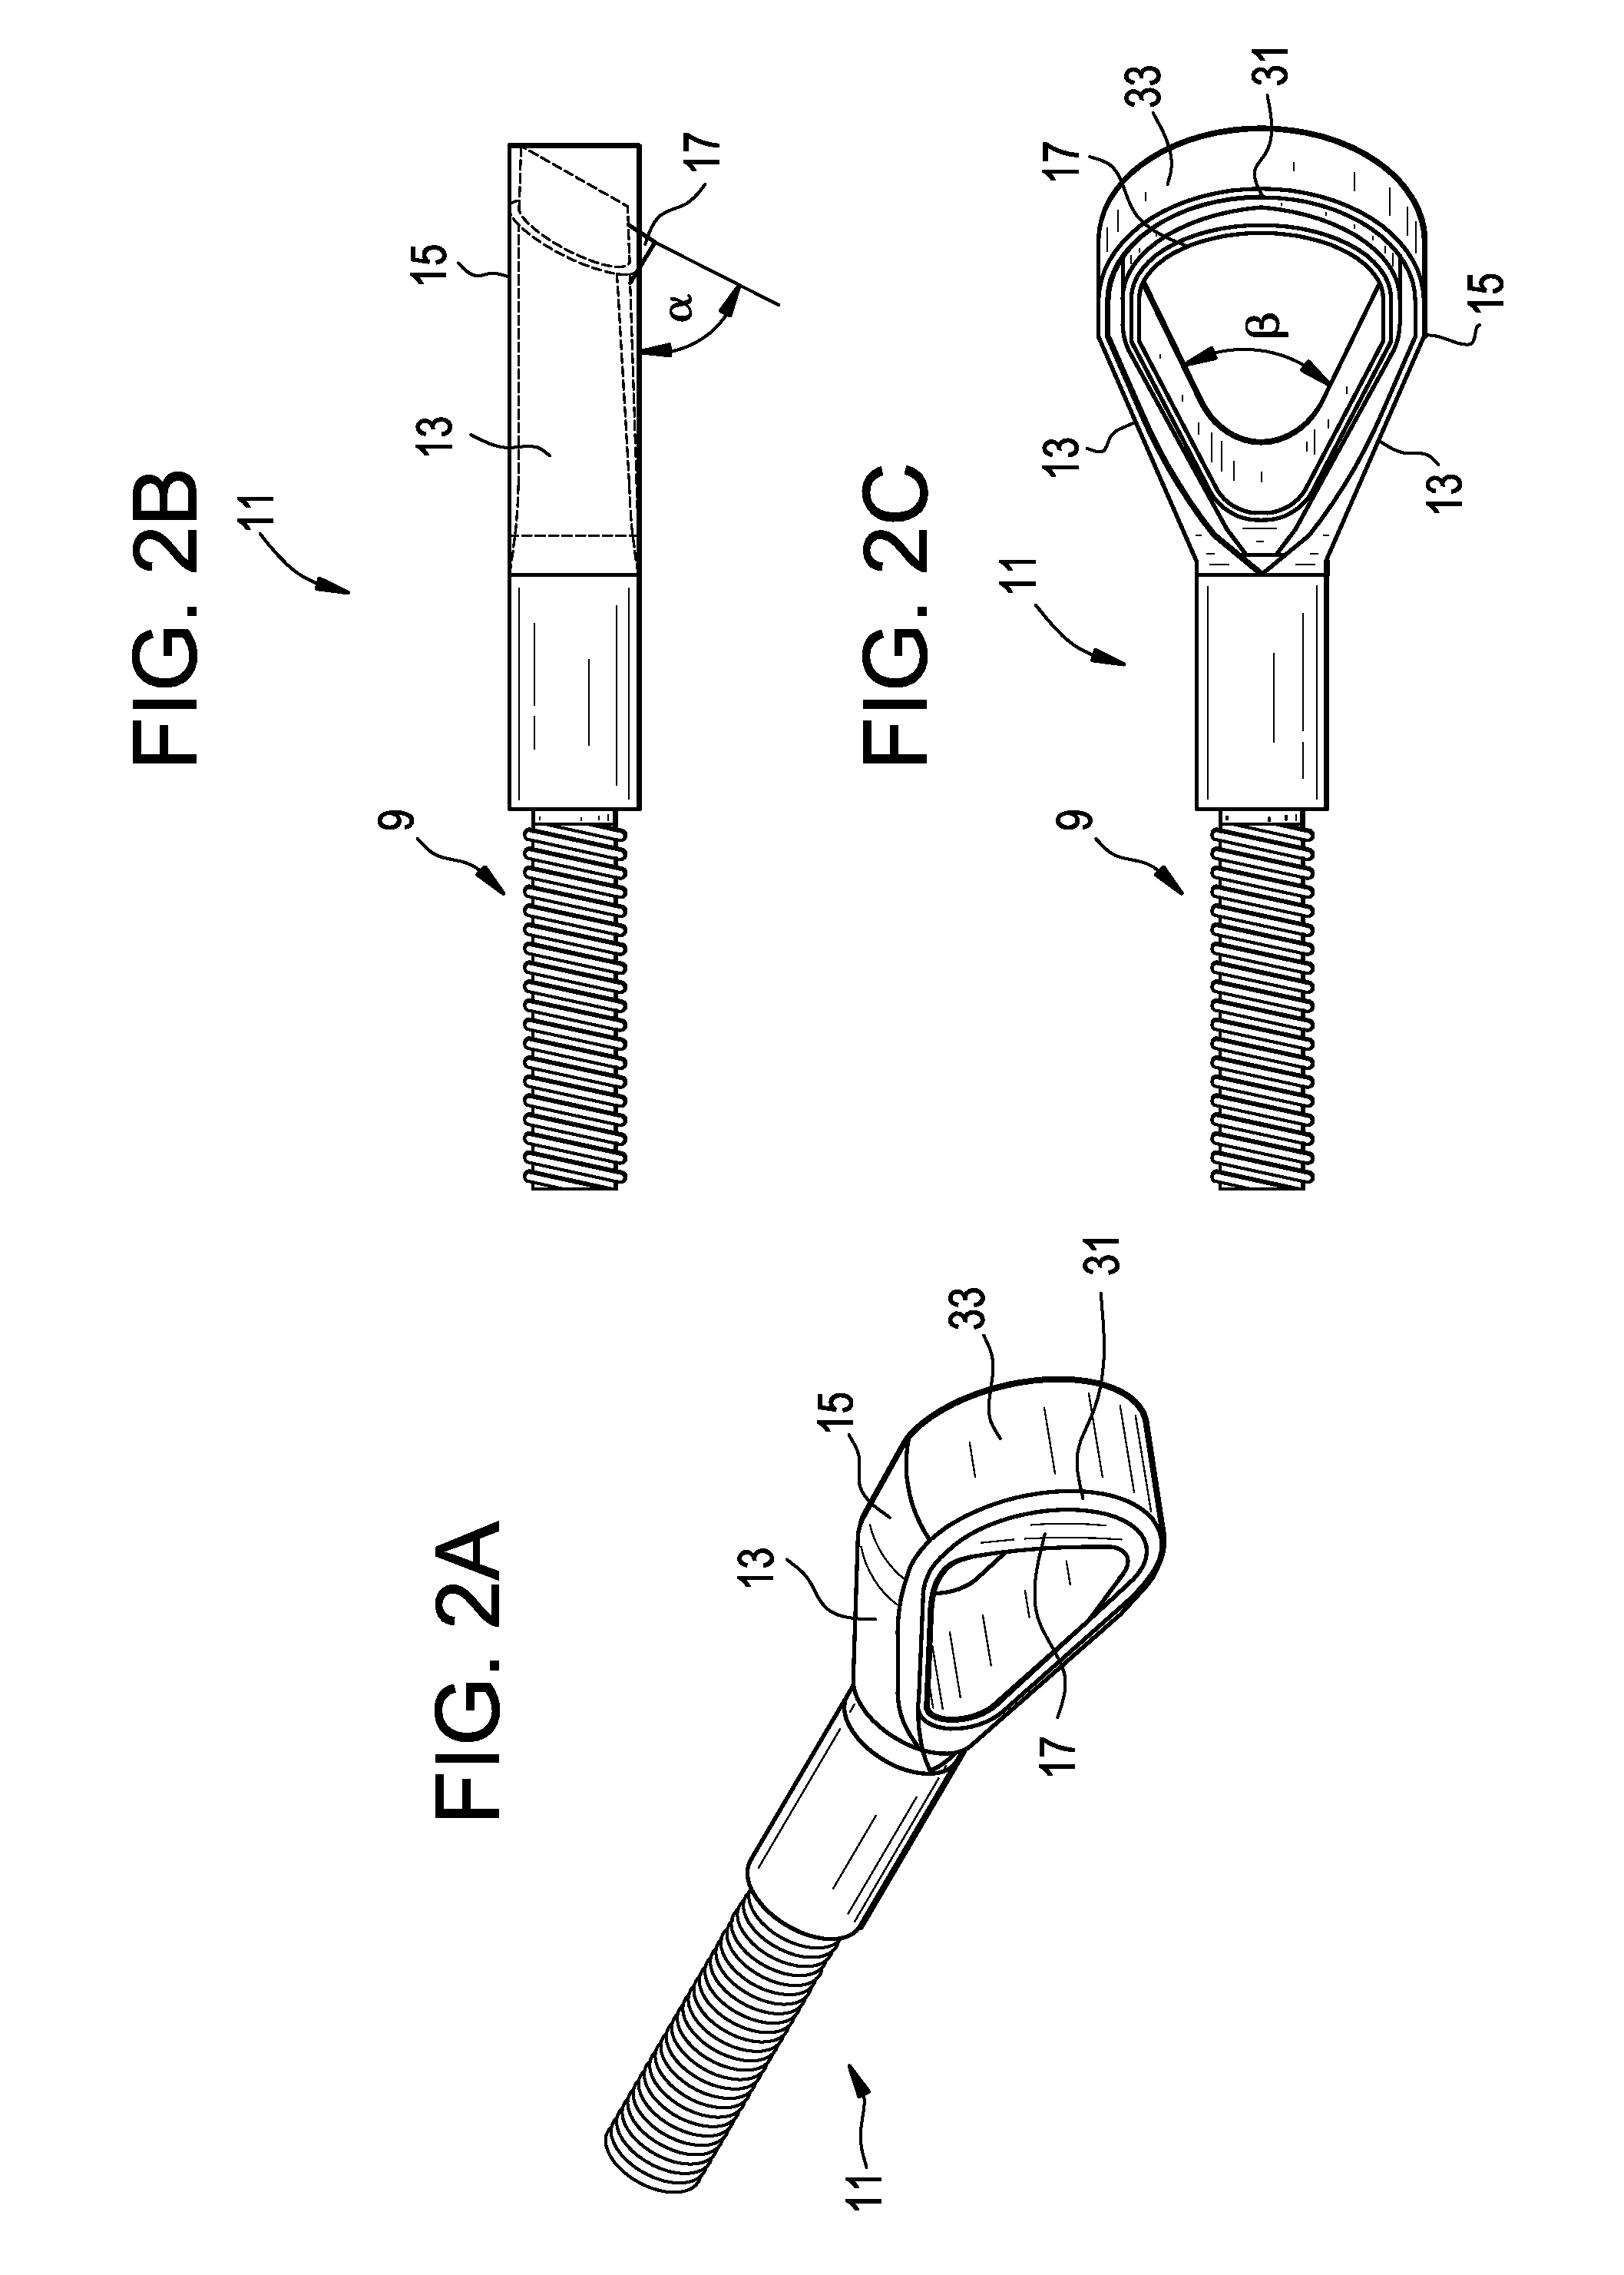 Conformable Soft Tissue Removal Instruments